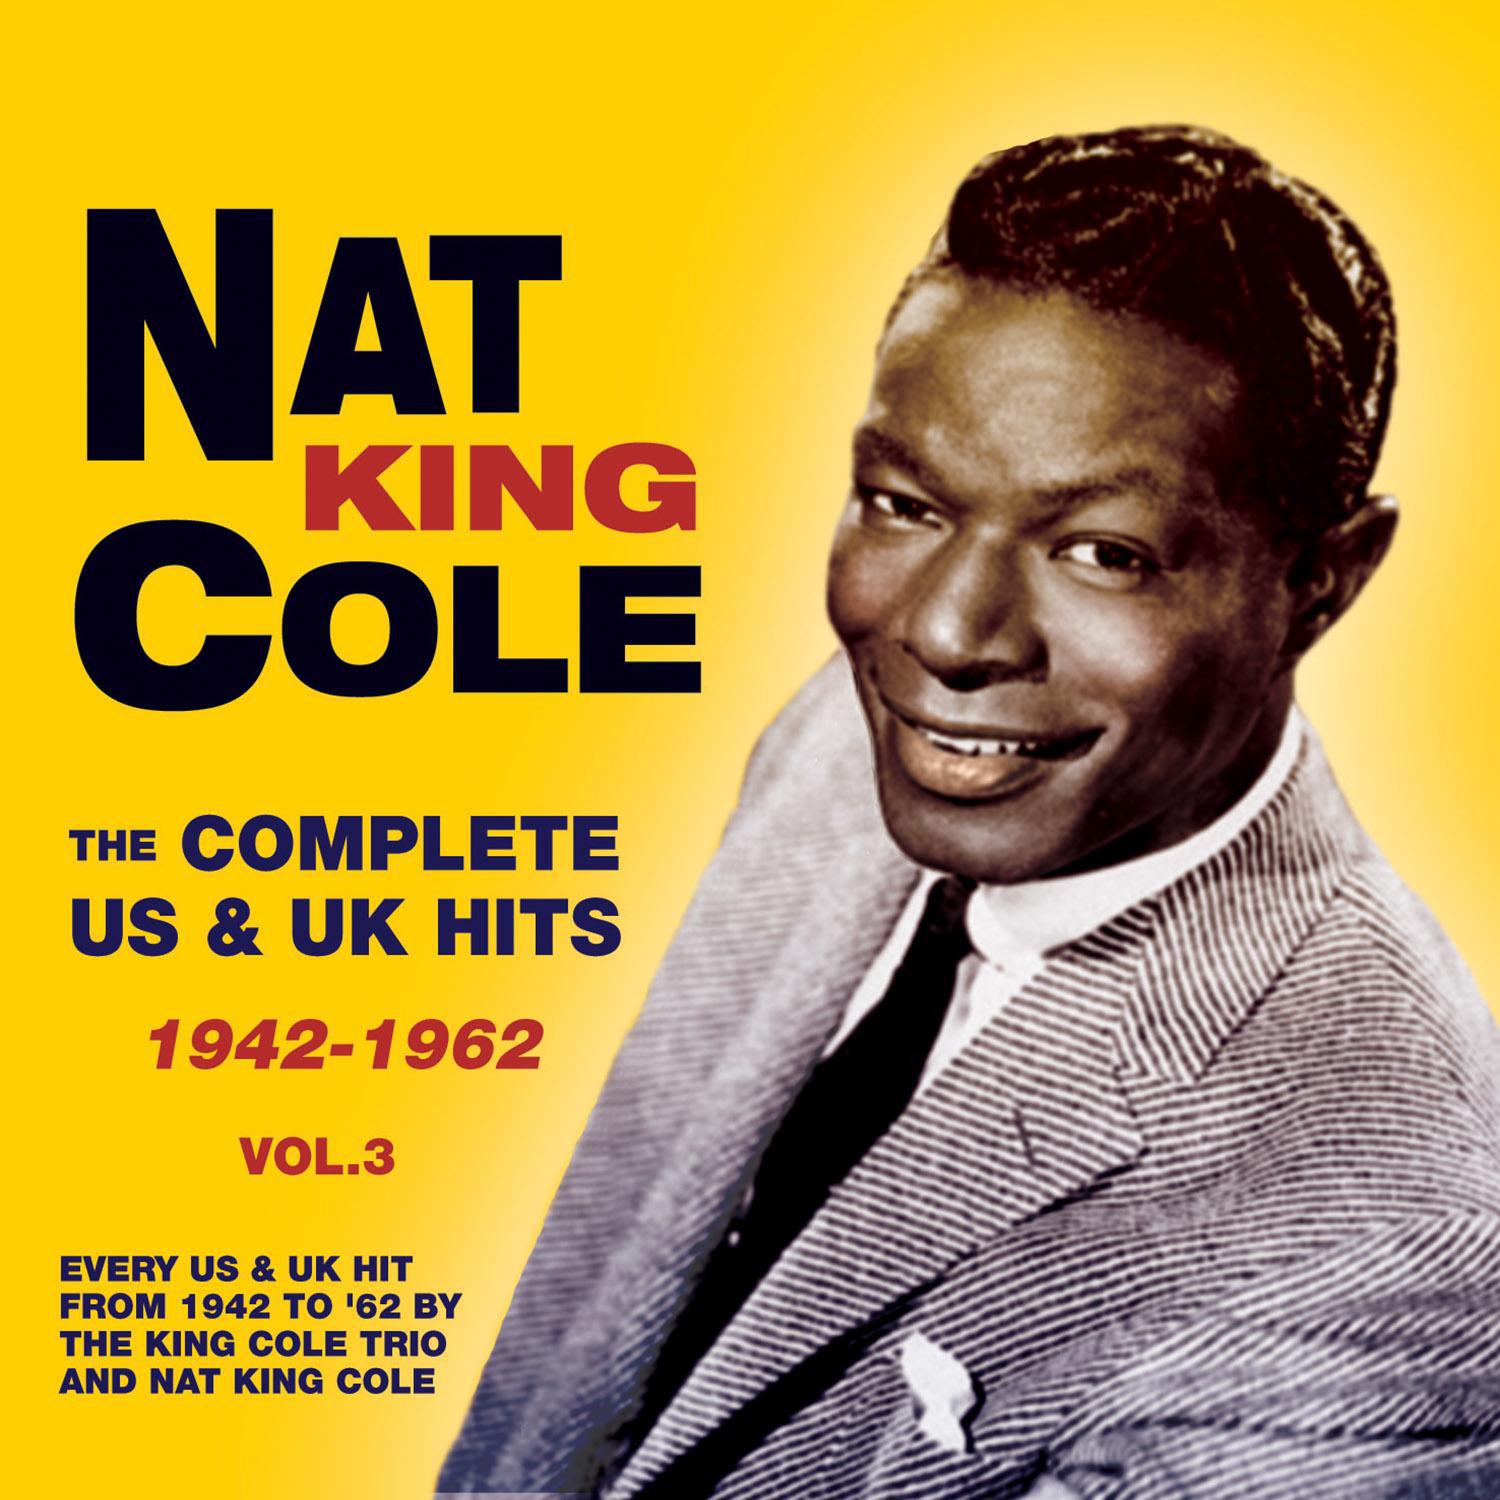 The Complete Us & Uk Hits 1942-62, Vol. 3